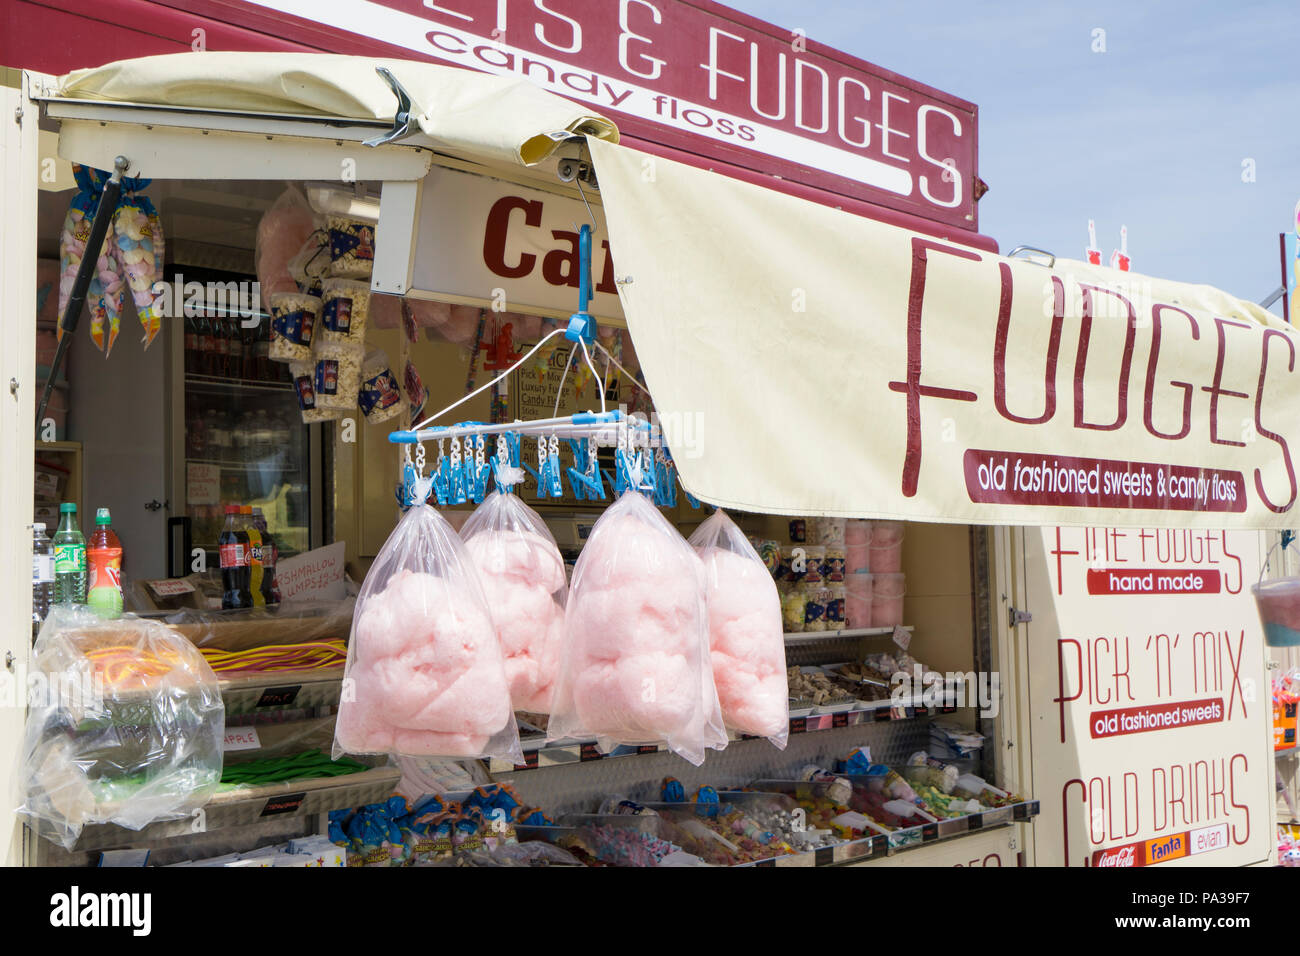 Candy floss in a bag Stock Photo